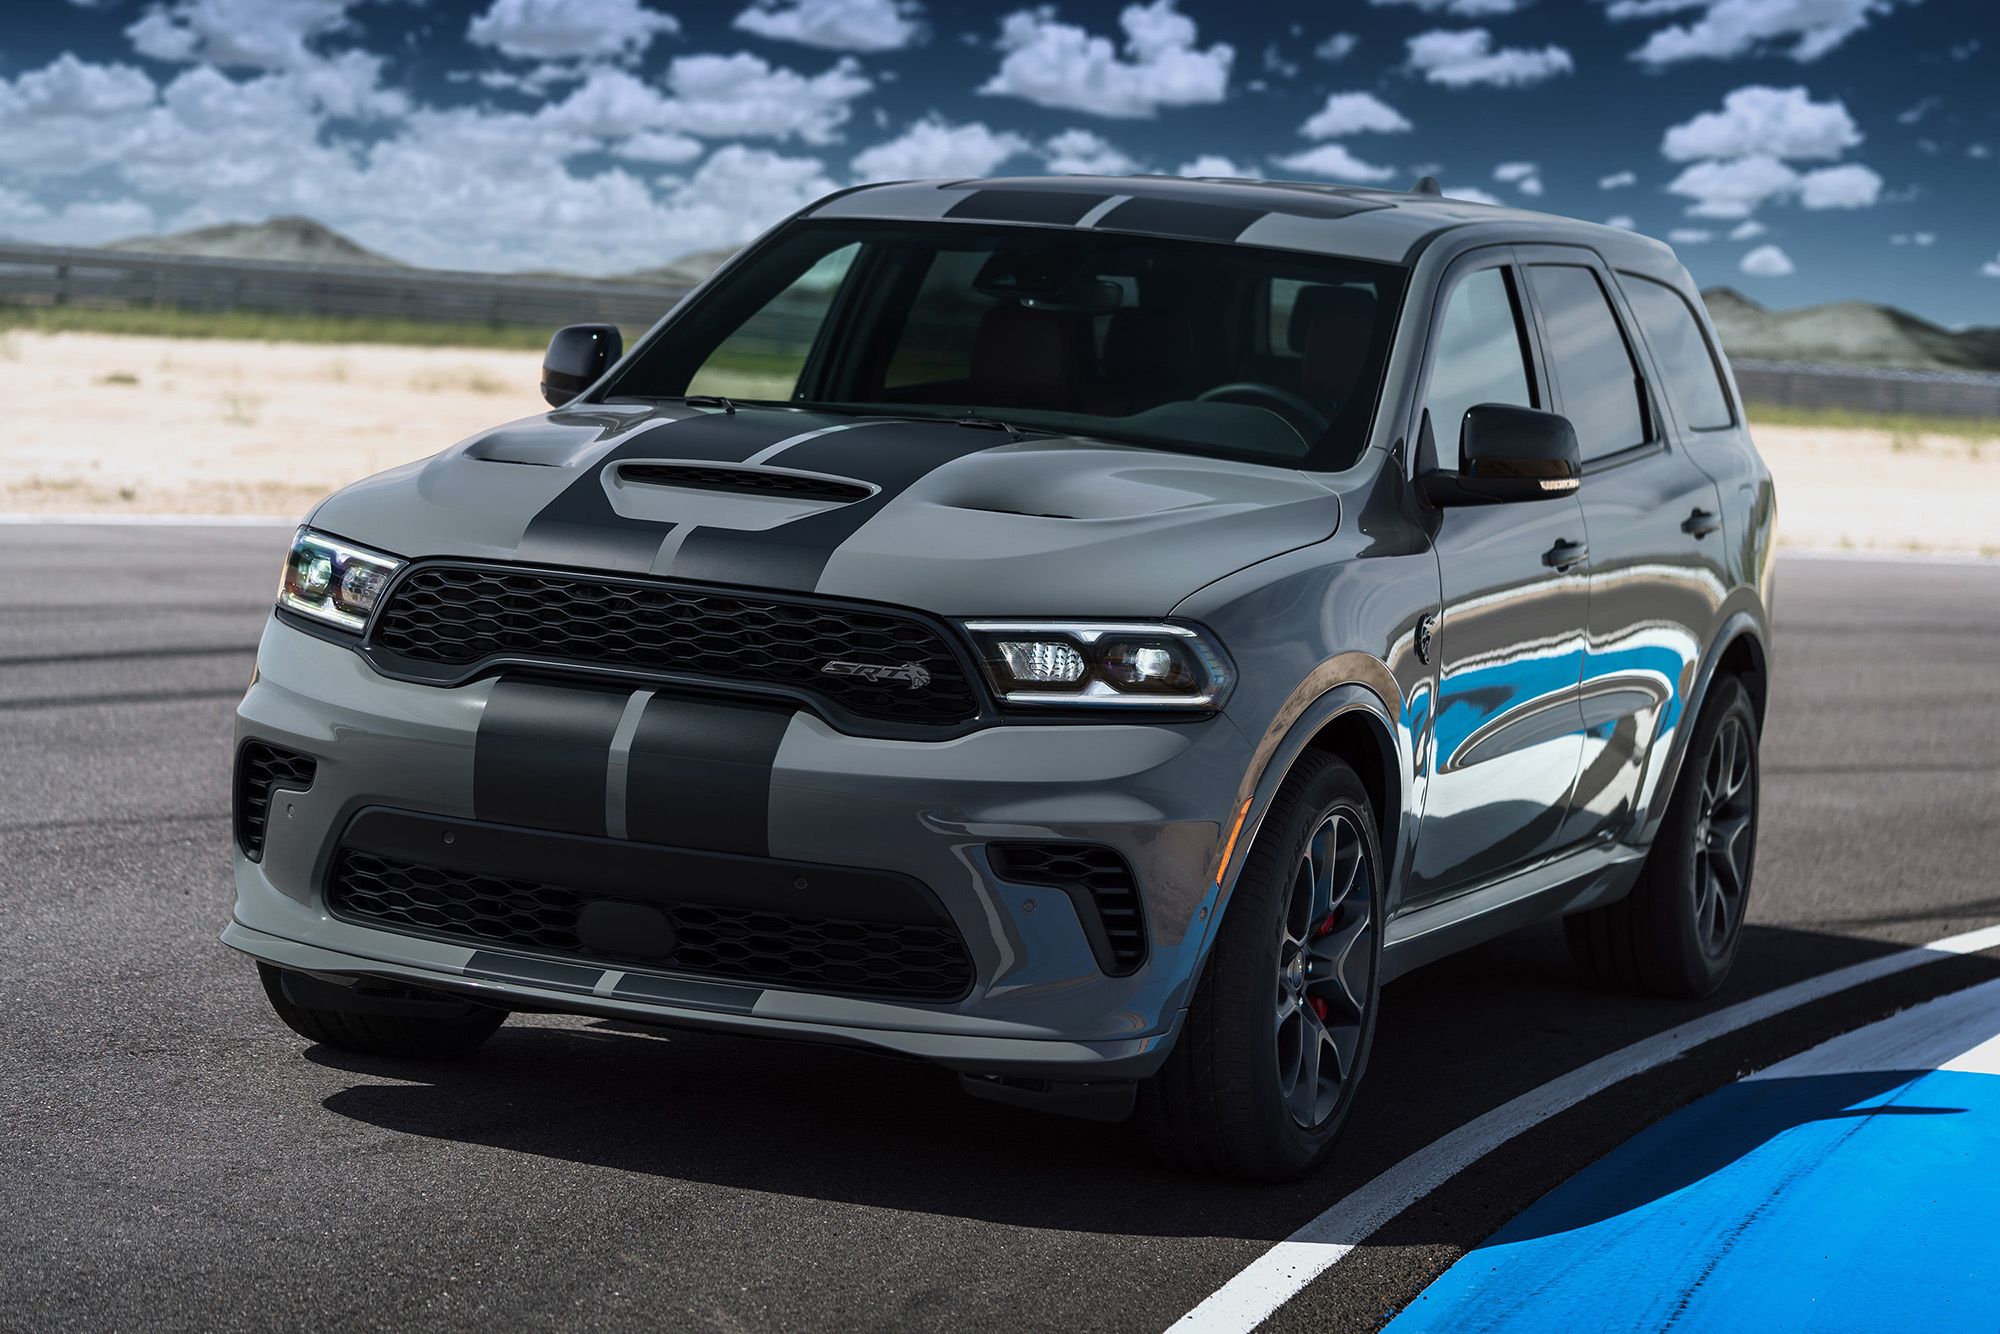 The Dodge Durango SRT Hellcat is a family SUV that can go 180 mph | CNN  Business